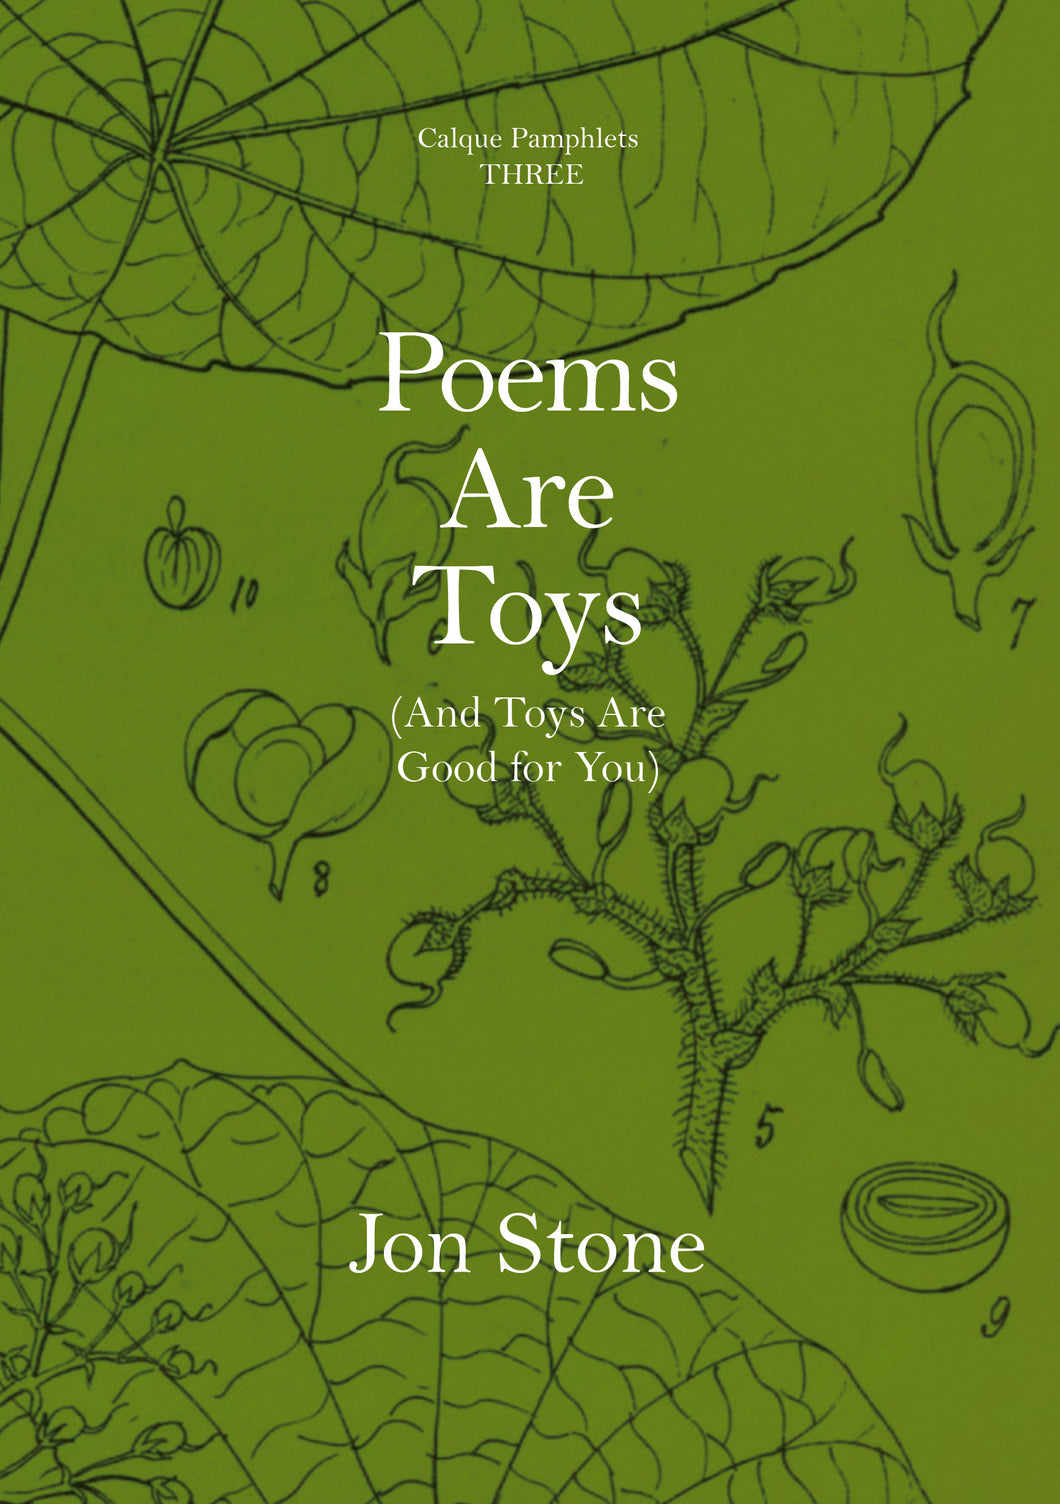 Pamphlet Three - Poems Are Toys (And Toys Are Good for You)